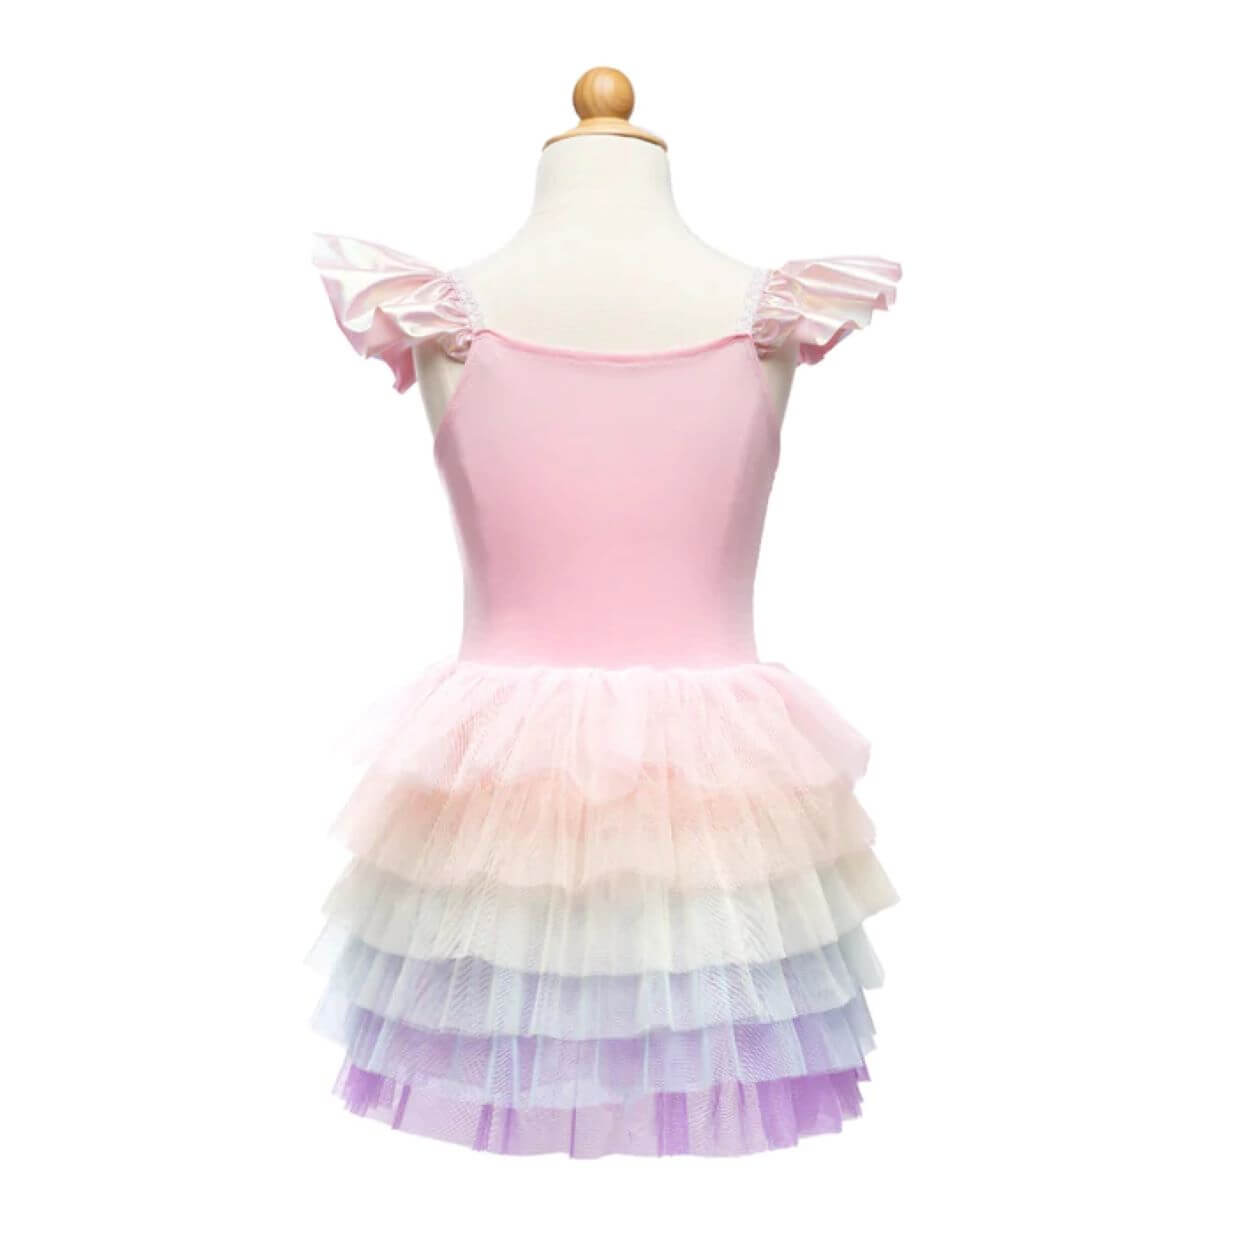 Girls dress with pink bodice top and layered tutu skirt in rainbow pastel colours